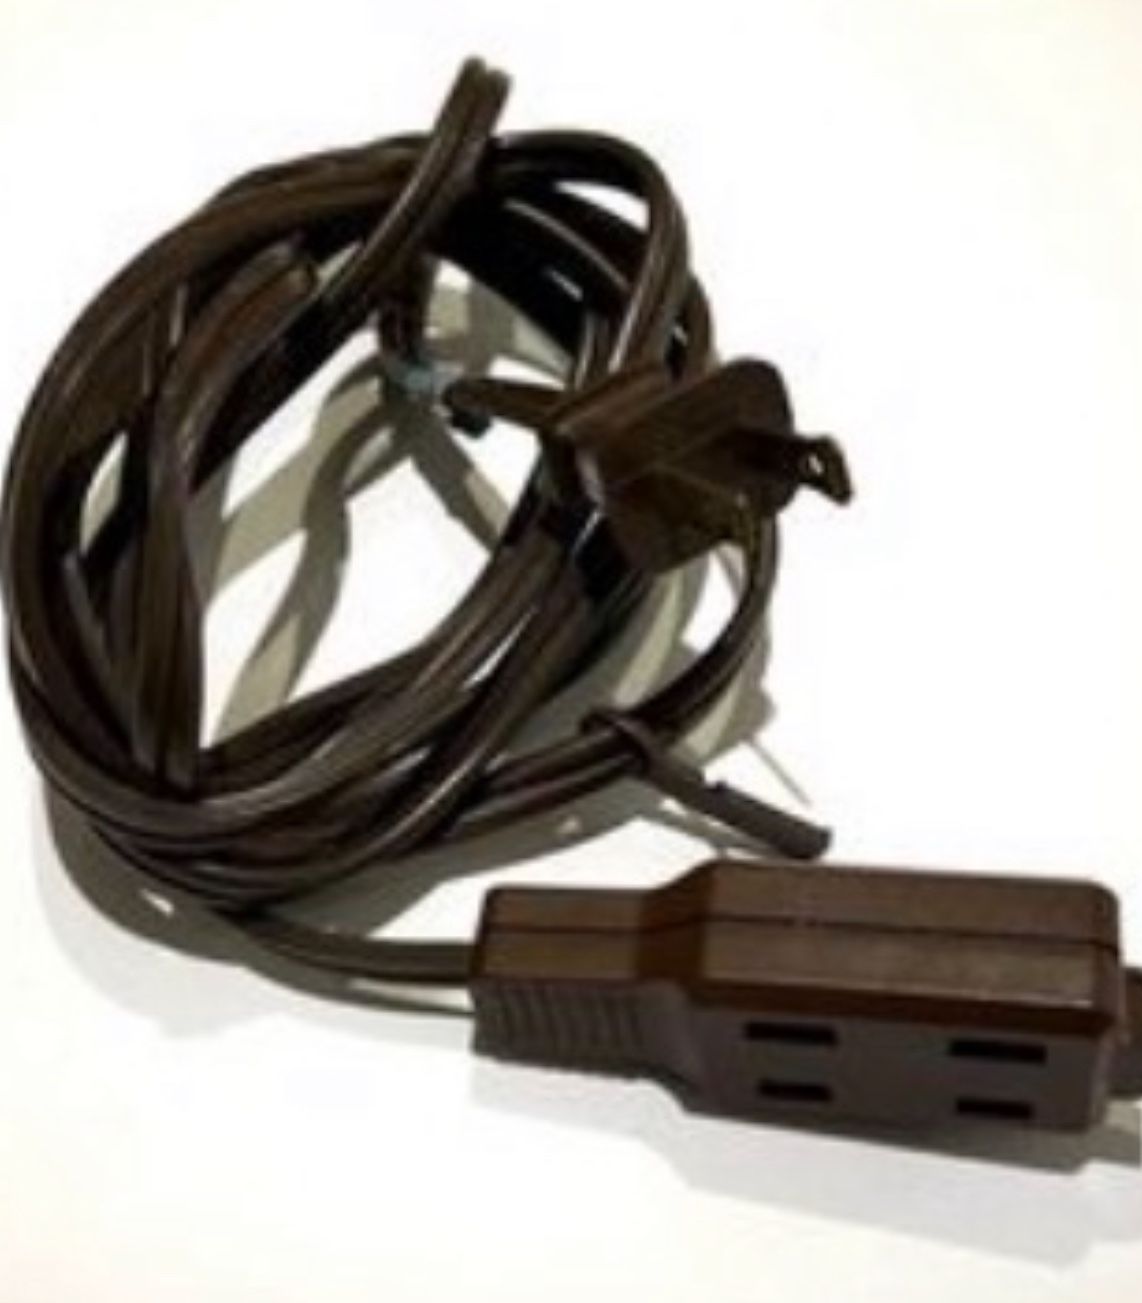 18 FT. Indoor Extension Cord Brown 3 Outlets Electronic Devices- Preowned